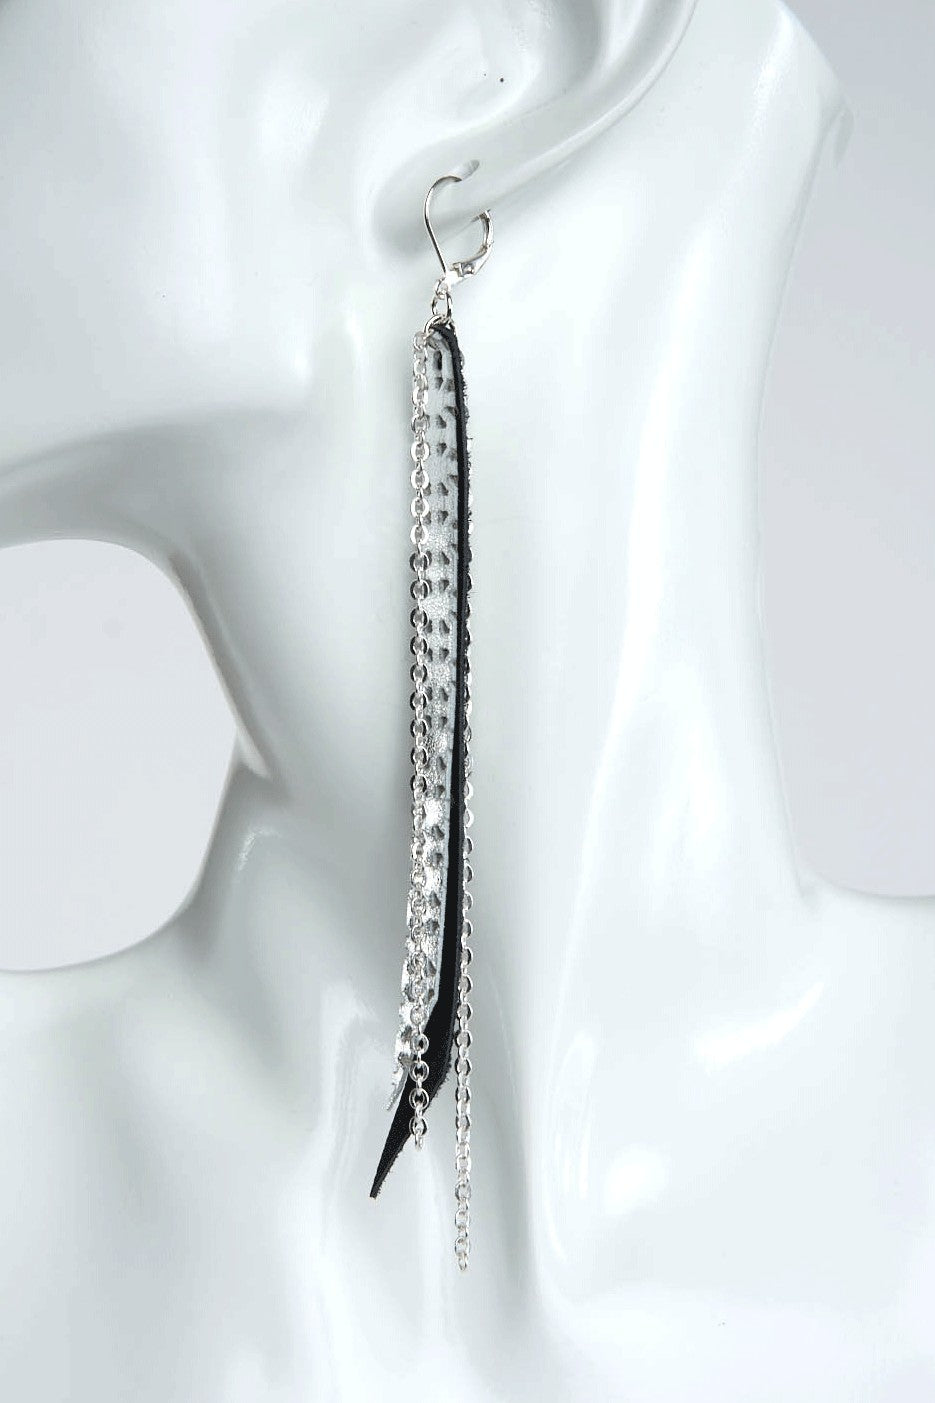 Black & Silver Textured Leather with Silver Chain Earrings